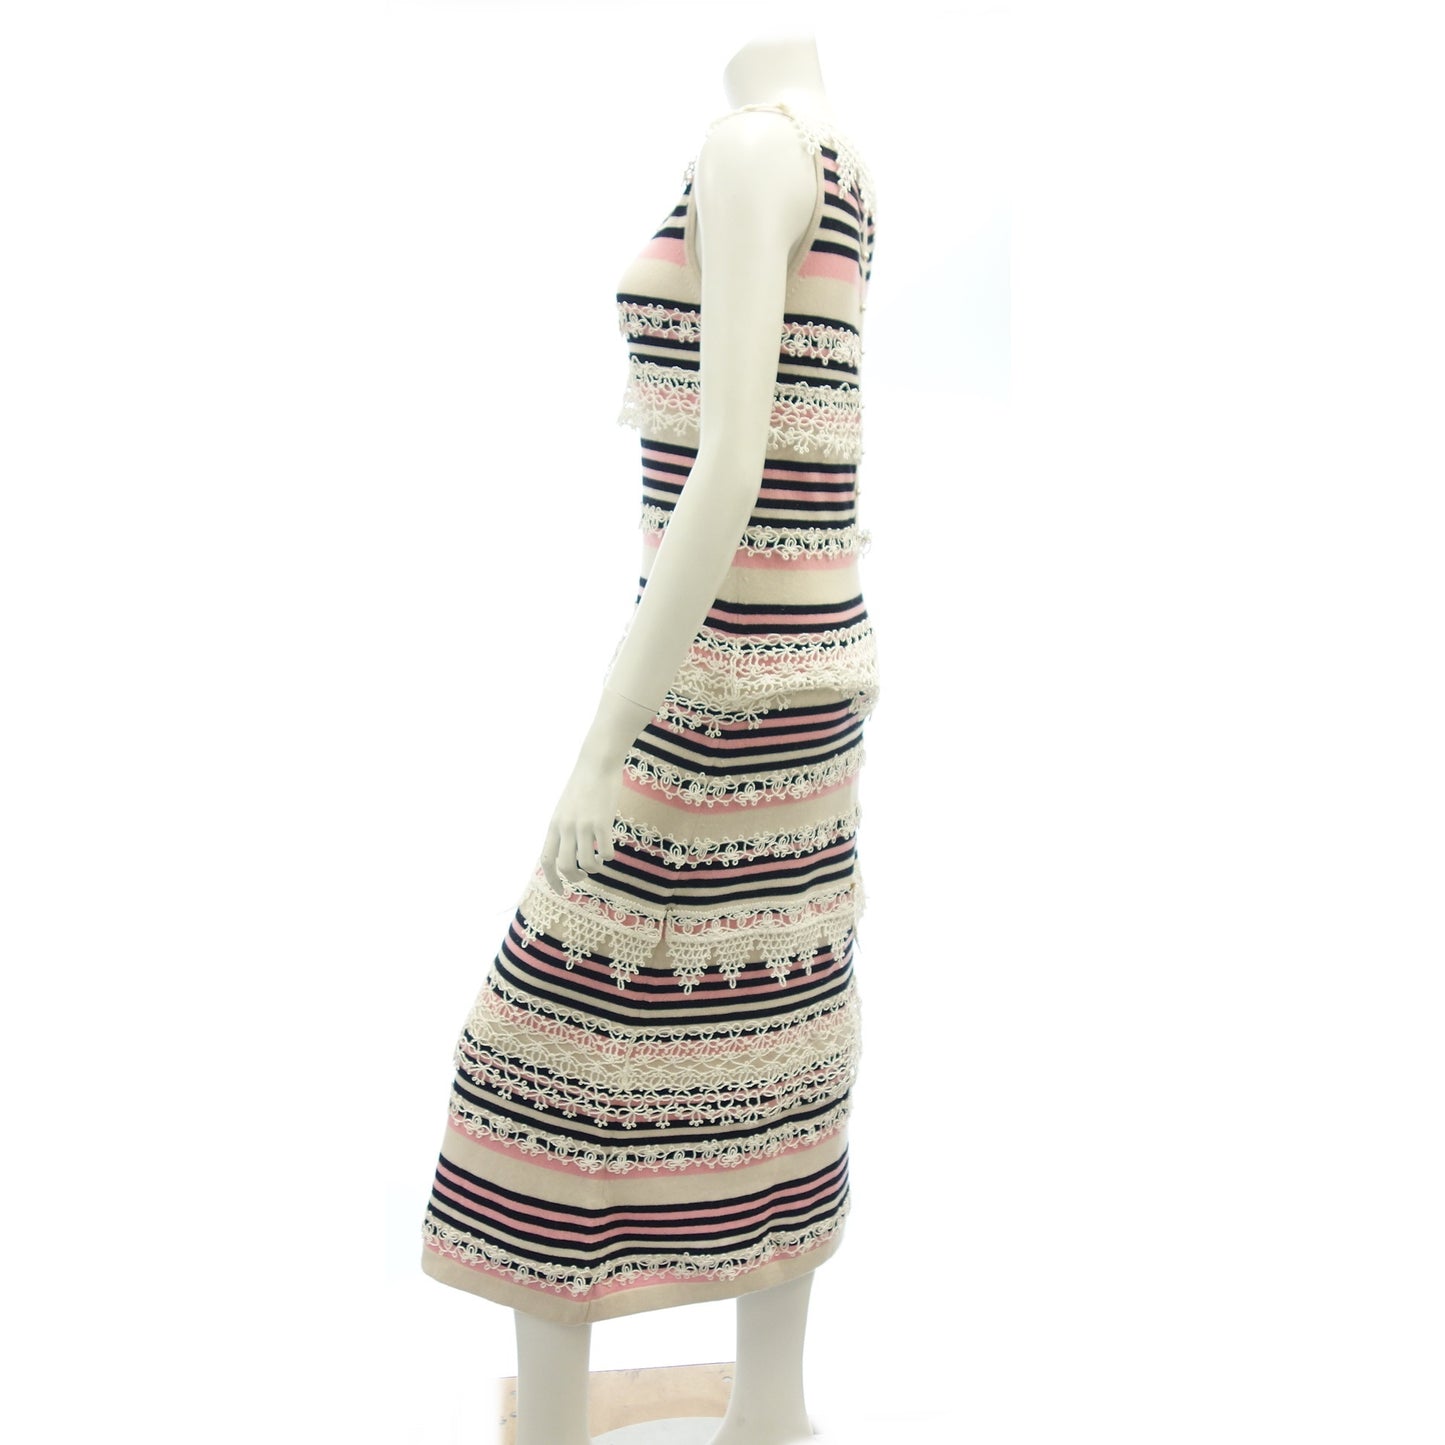 Used ◆CHANEL Knit Dress Sleeveless Coco Mark Pearl P40 Cashmere Women's Multicolor Size 38 CHANEL [AFB16] 